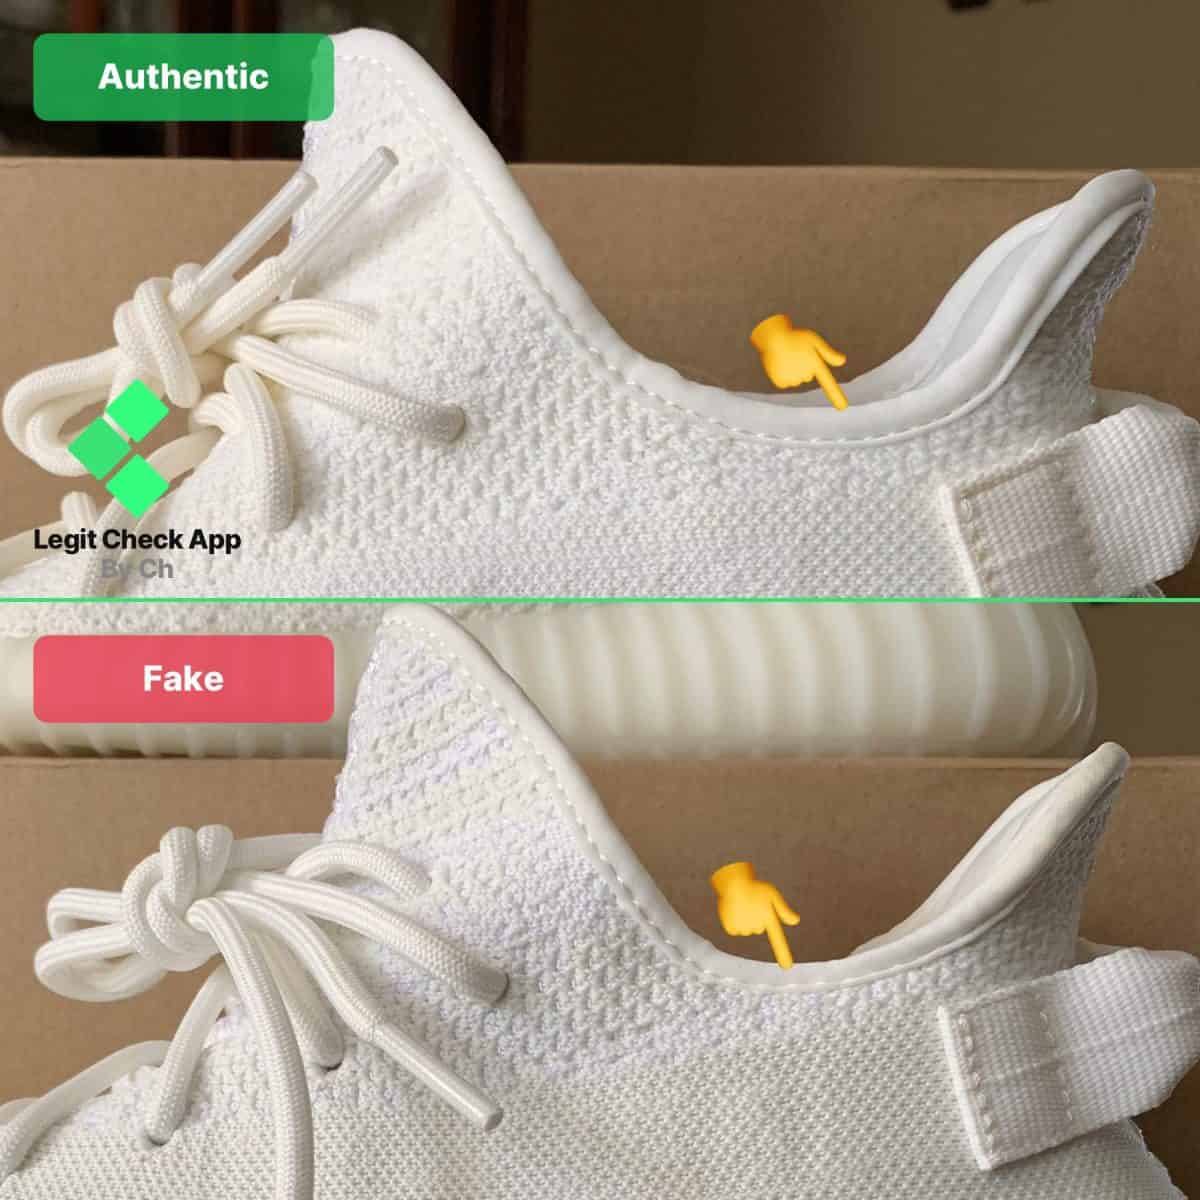 The Ultimate Real Vs Fake Yeezy Boost 350 V2 Cream White Guide Legit Check By Ch